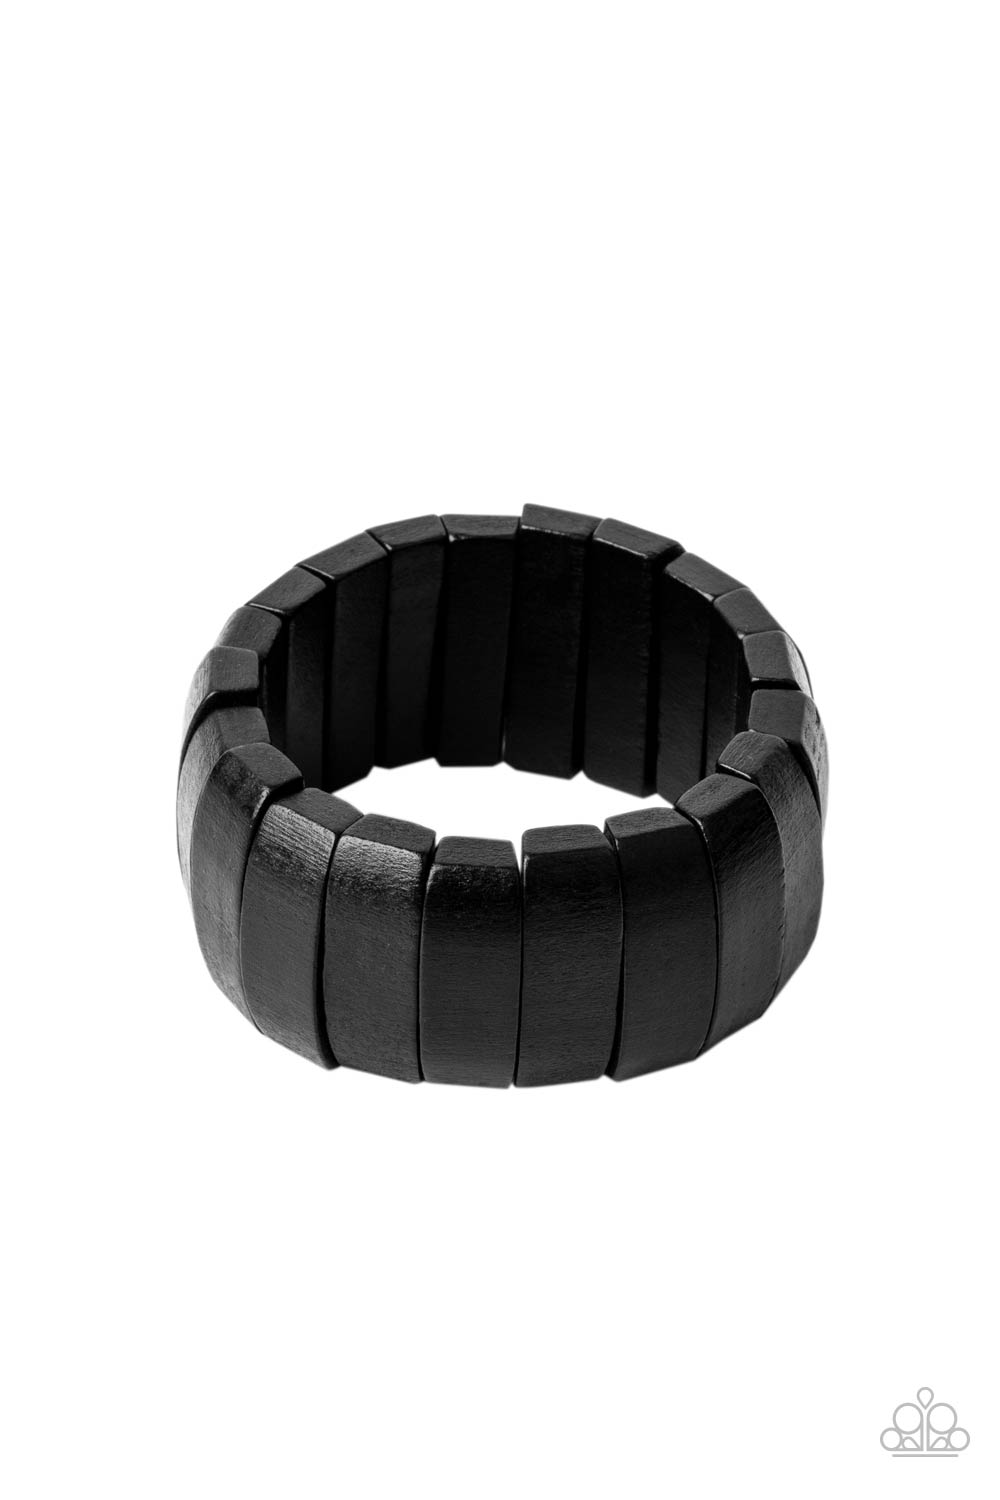 Raise The BARBADOS - Black Wood Stretchy Bracelet - A bold collection of black wooden beads are threaded along stretchy bands around the wrist for a colorful display. Sold as one individual bracelet.